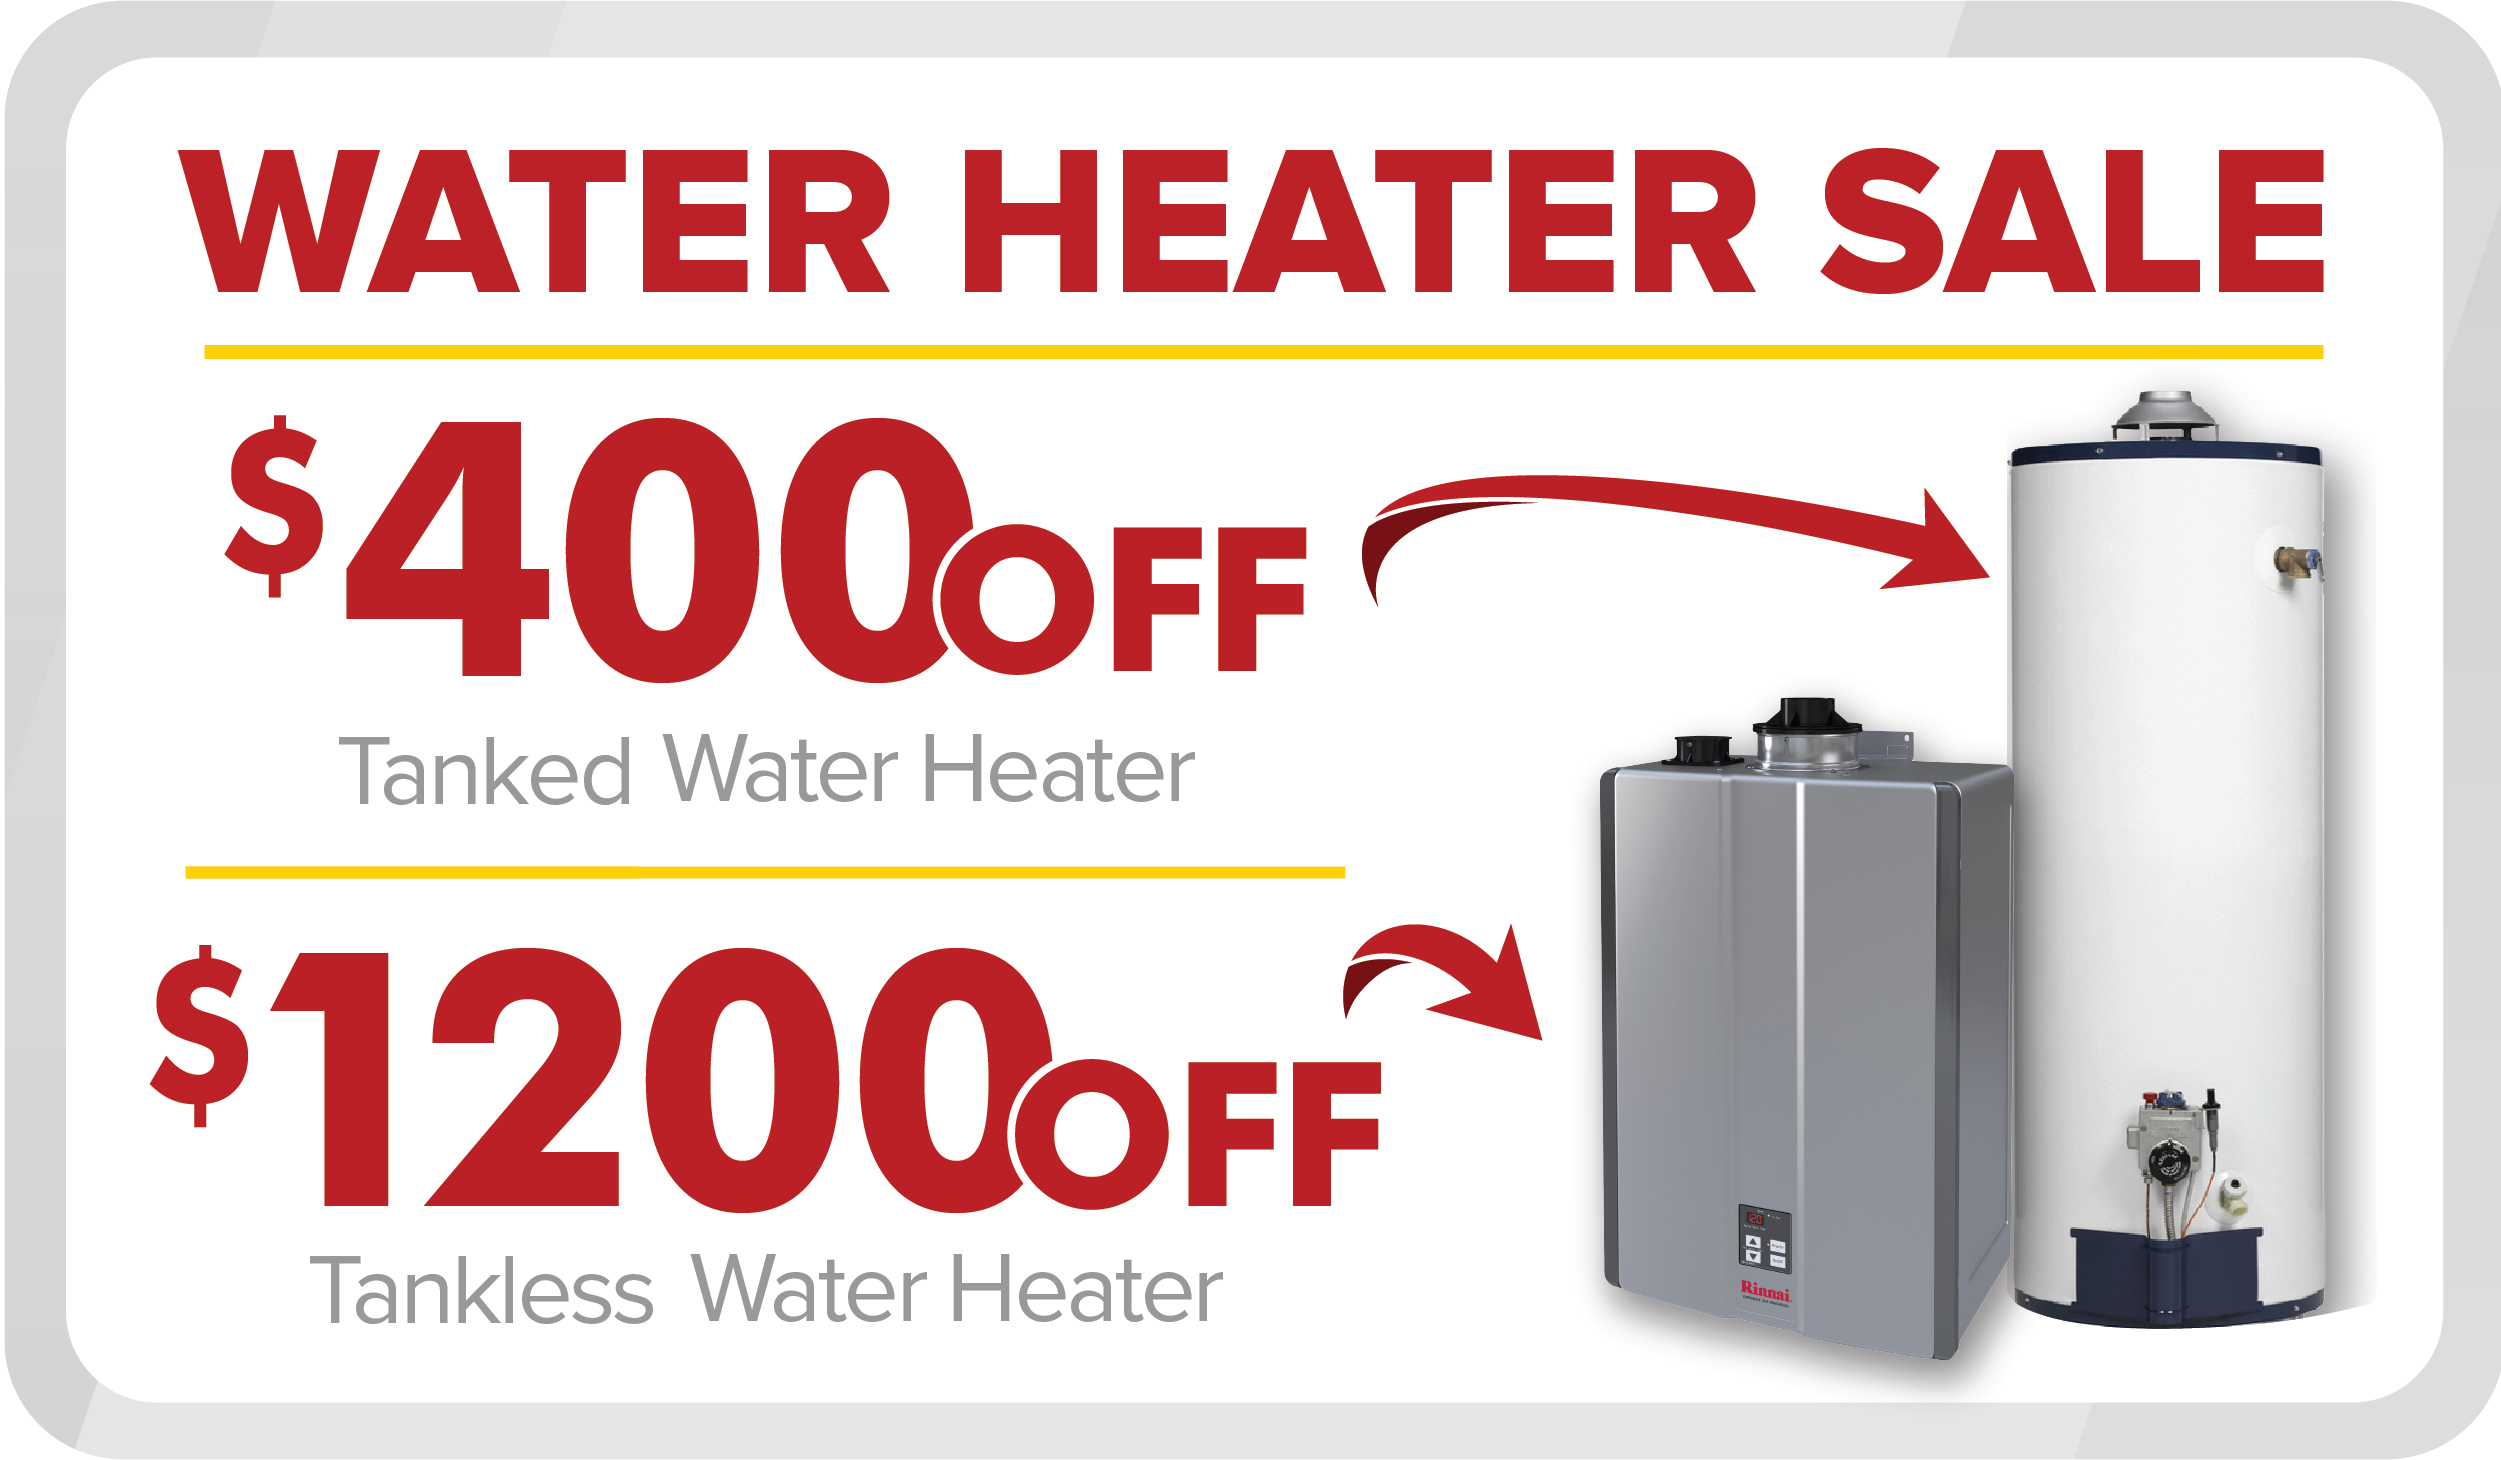 Water Heater Sale! Save $400 OFF any New Tanked Water Heater or $1,200 OFF any New Tankless Water Heater